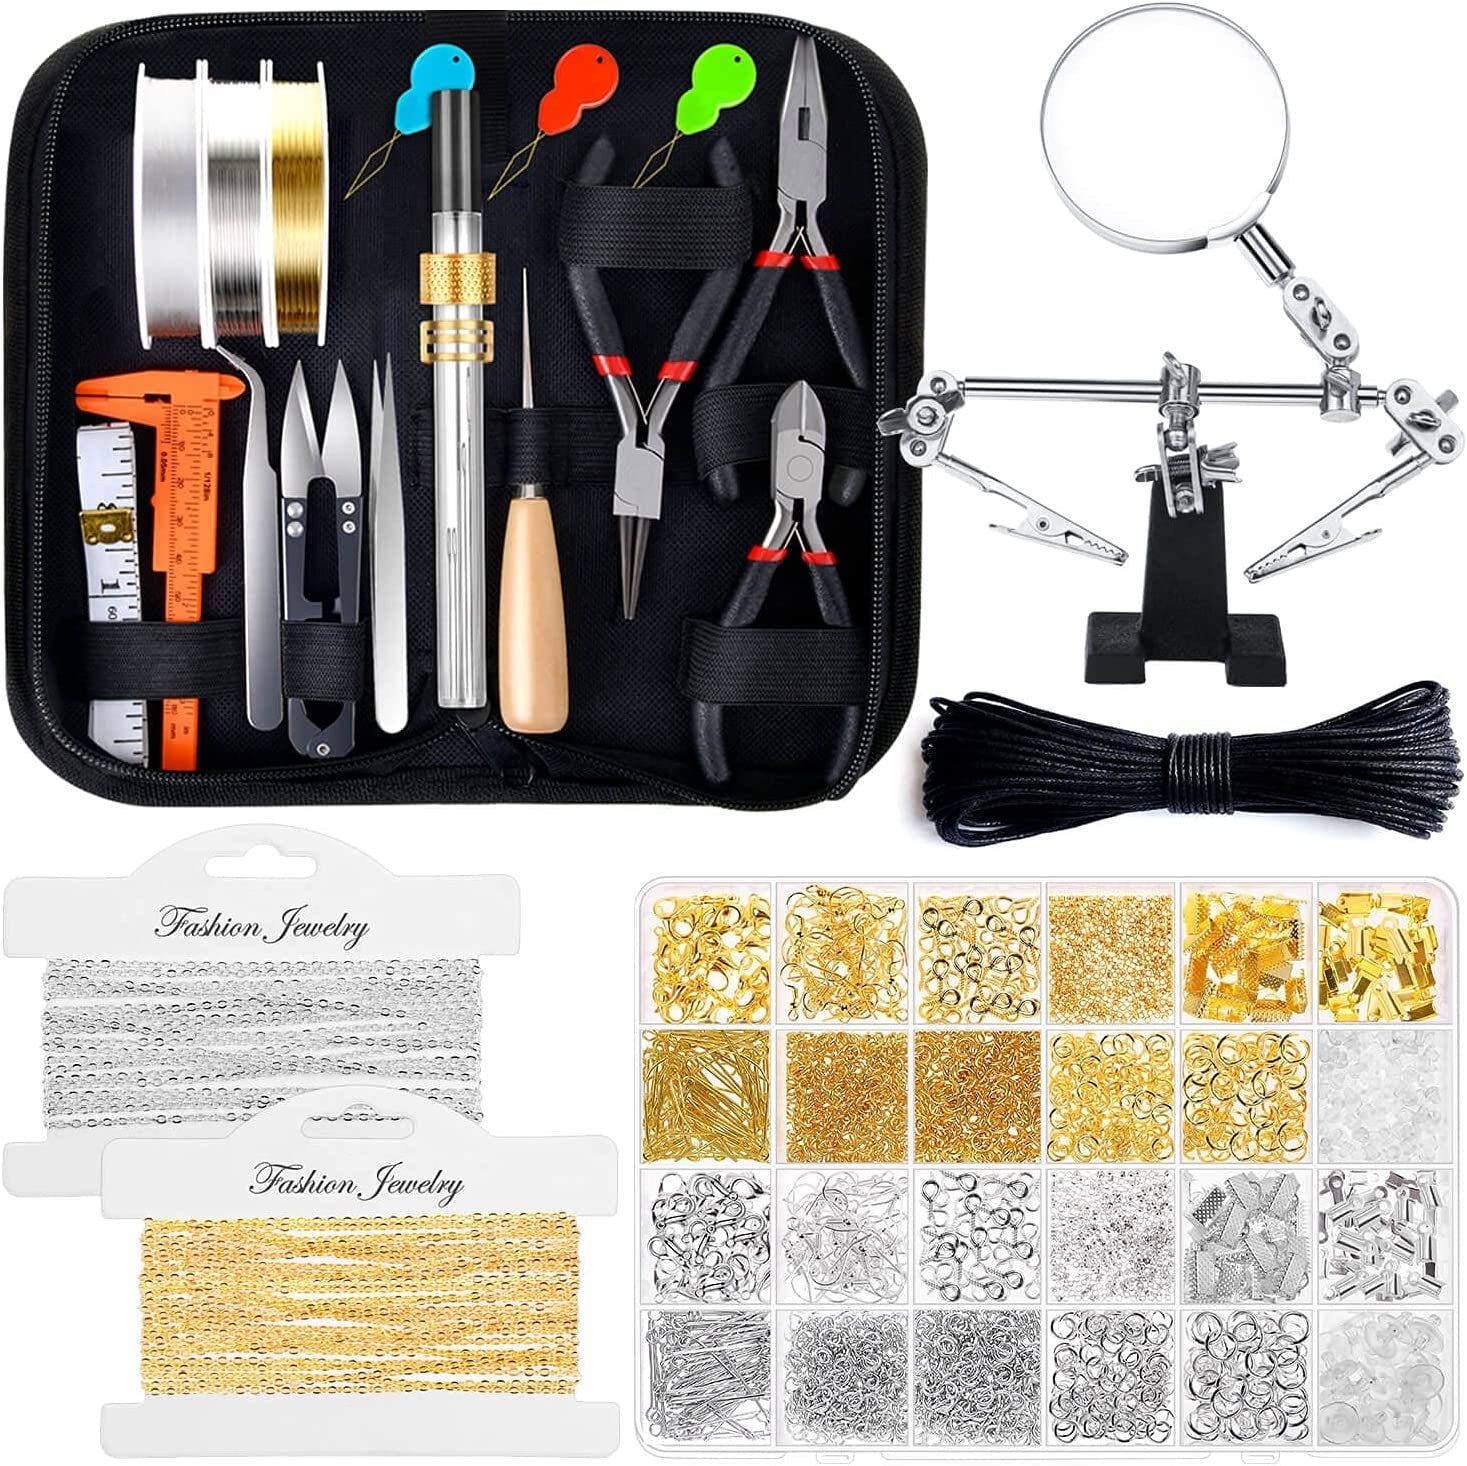 2020Pcs Jewelry Making Supplies Kit Earrings and Repair Tools Include  Jewelry Charms, Beads, Findings, Case and Beading Wire for Necklace Bracelet,  DIY Craft Gifts for Girls, Kids